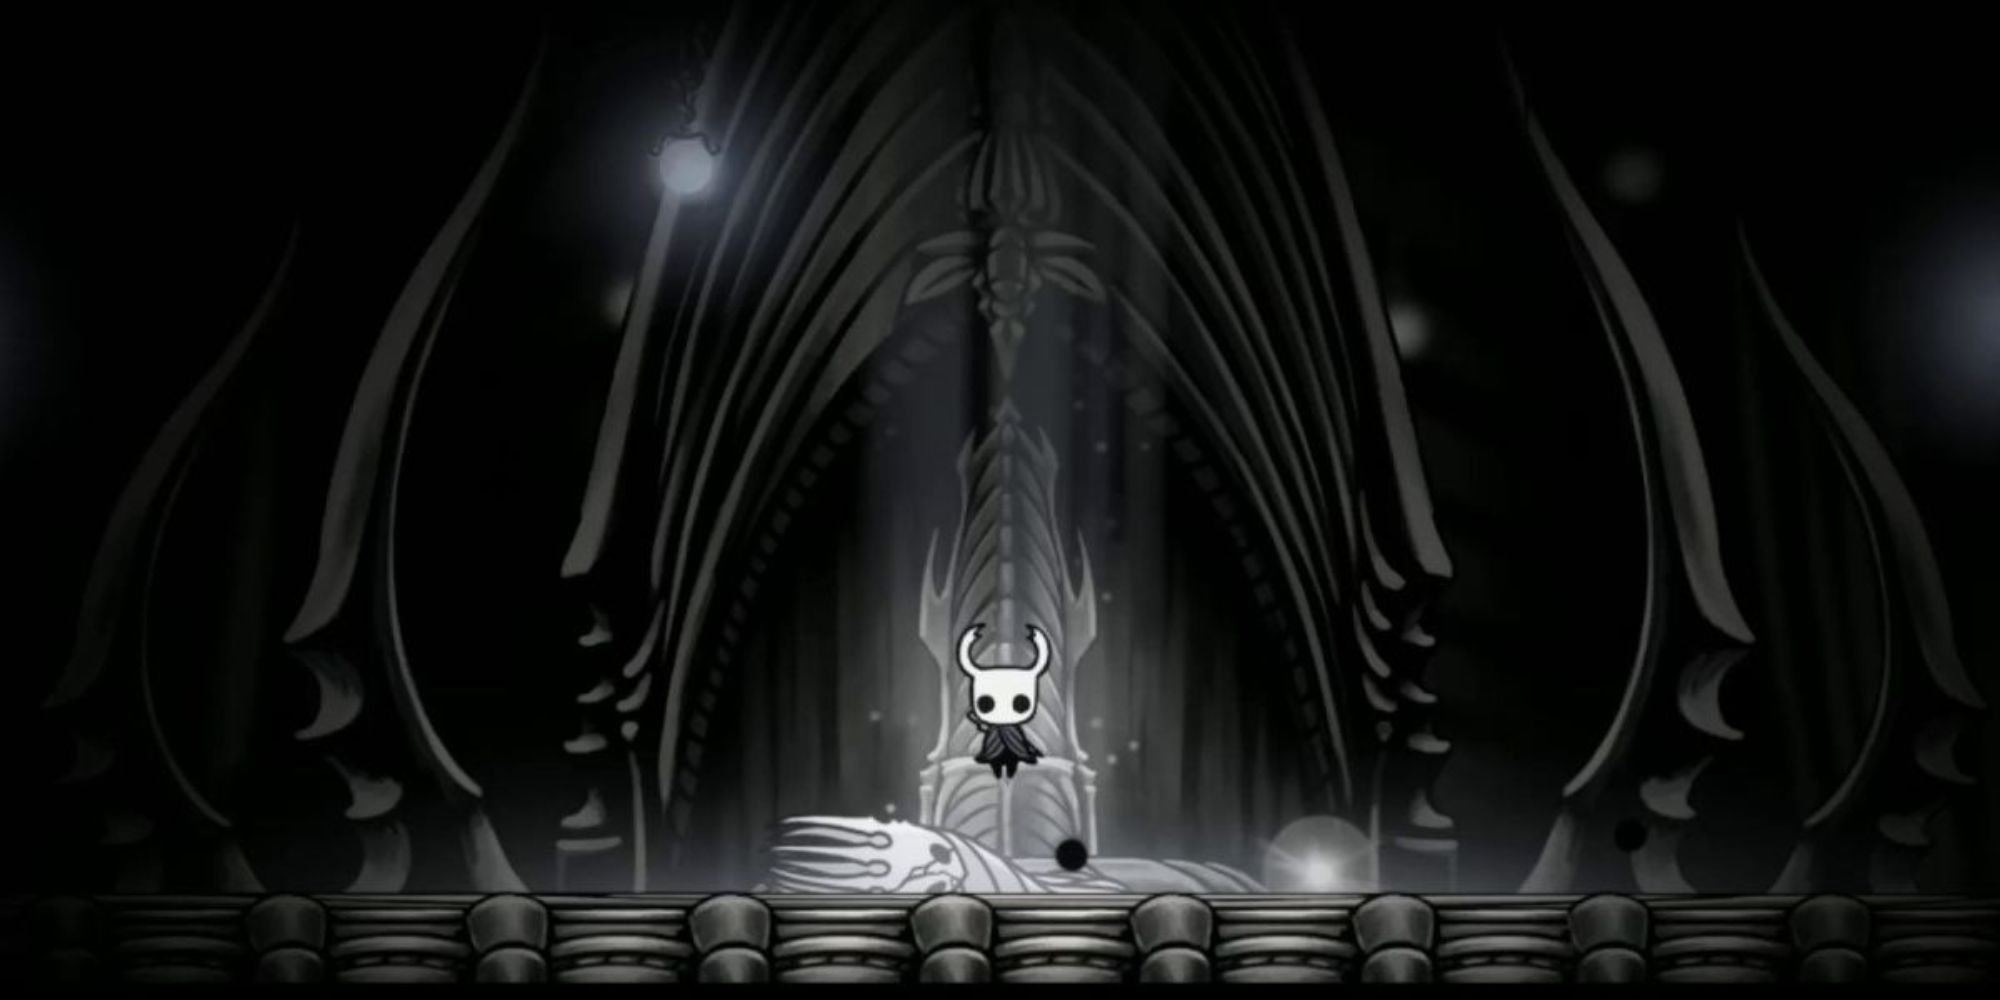 Hollow Knight sat on The Pale King Throne